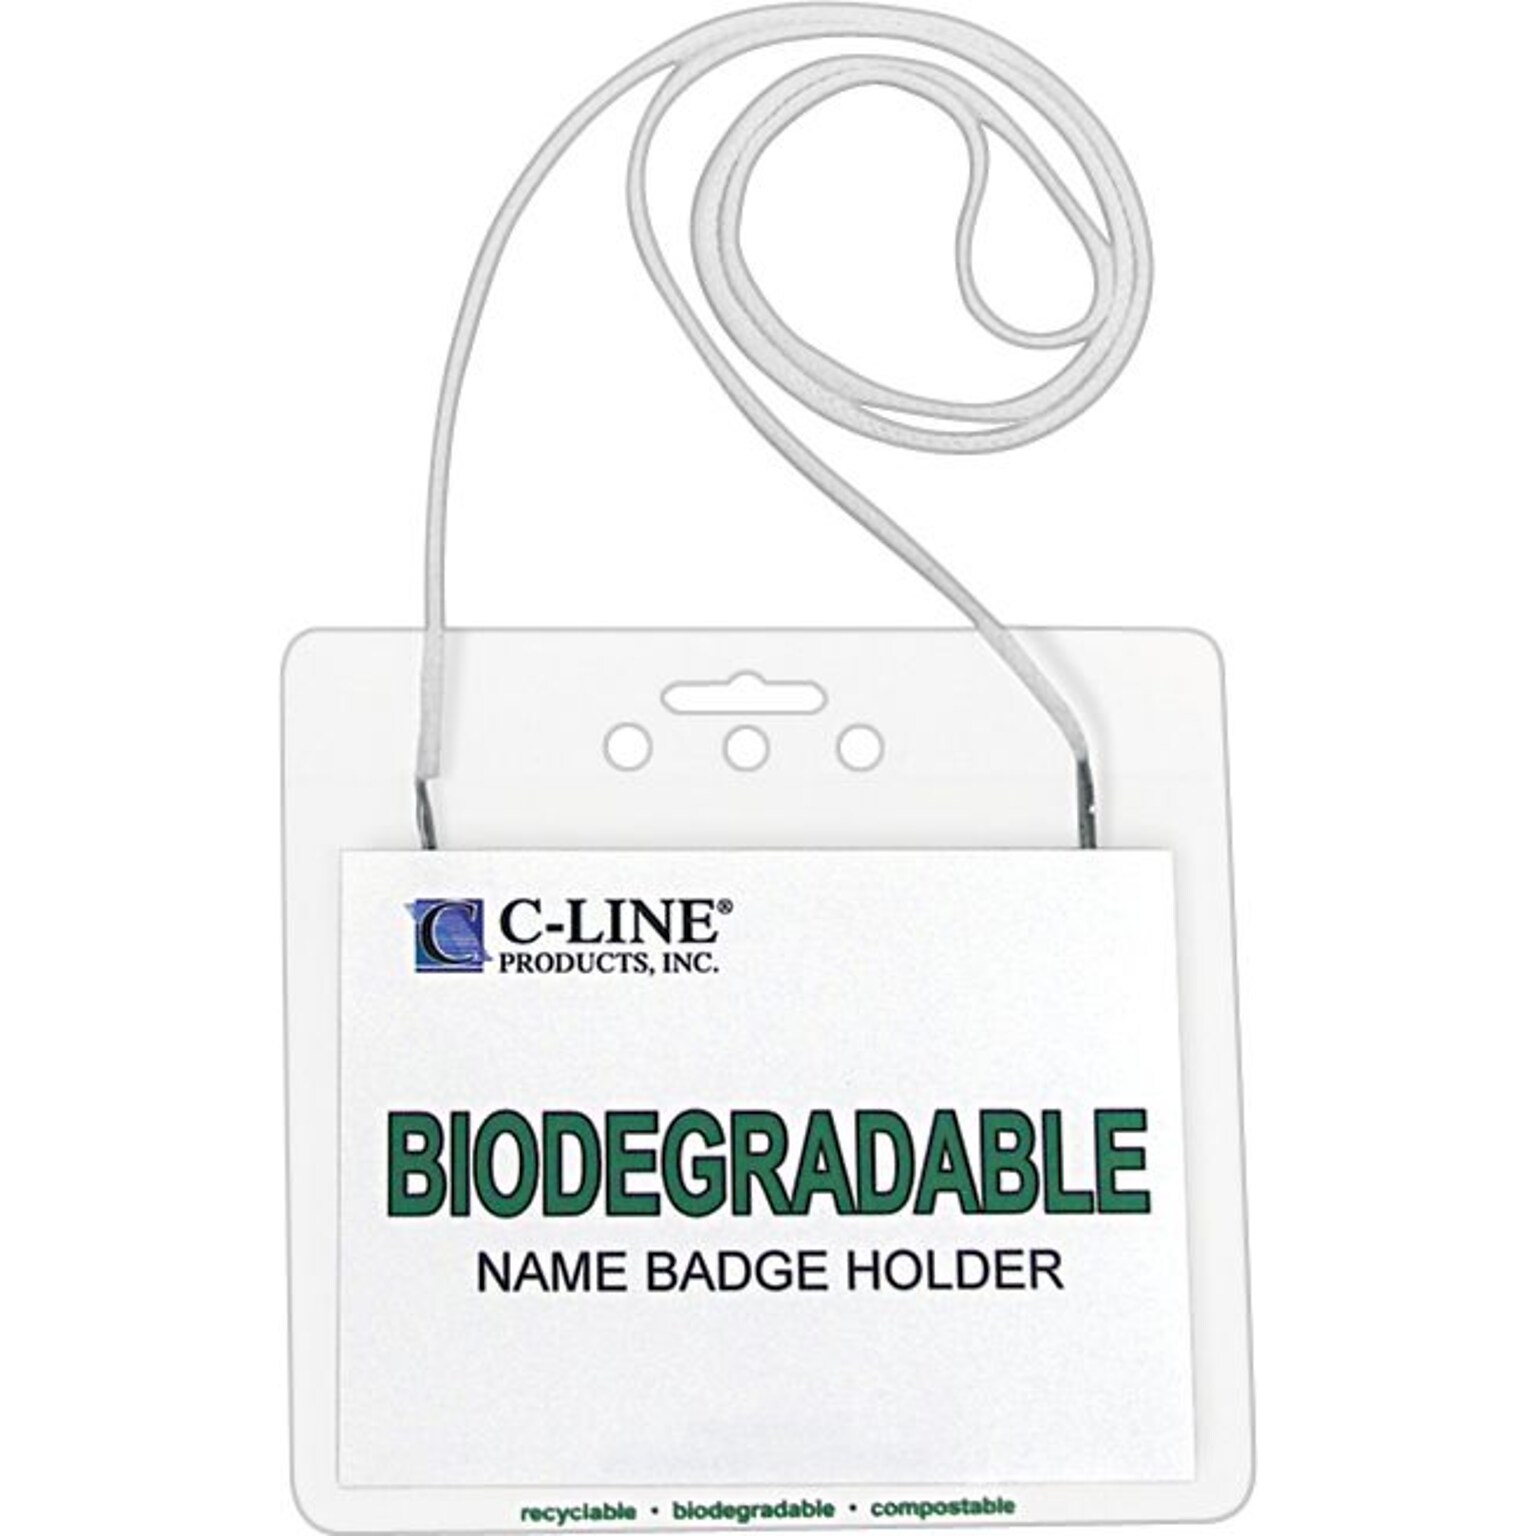 C-Line Name Badge Holder Kits, Top Load, Clear, 4 x 3, 50/Bx